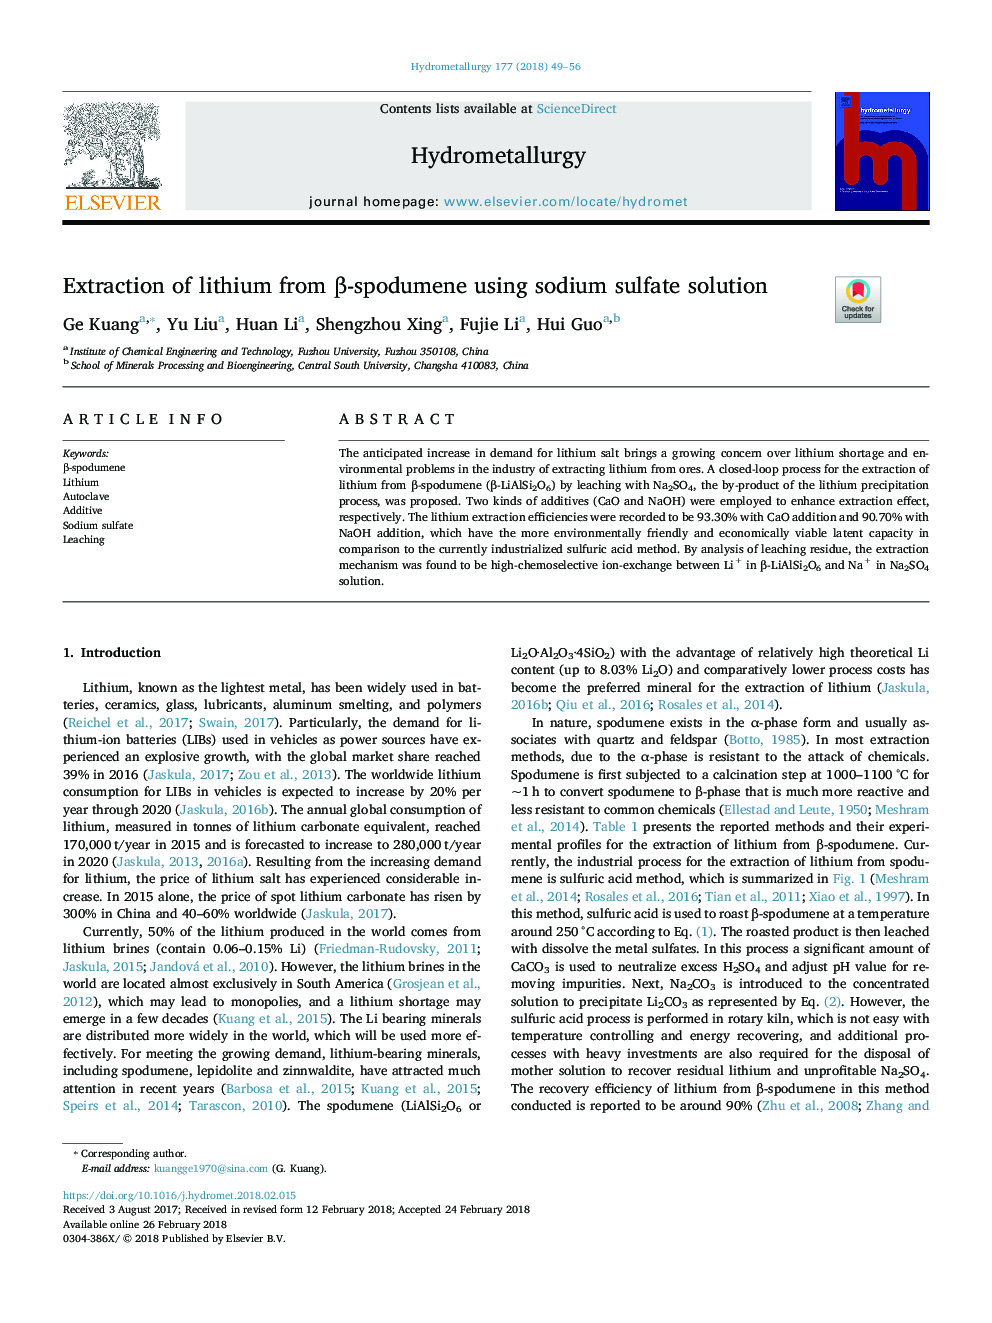 Extraction of lithium from Î²-spodumene using sodium sulfate solution